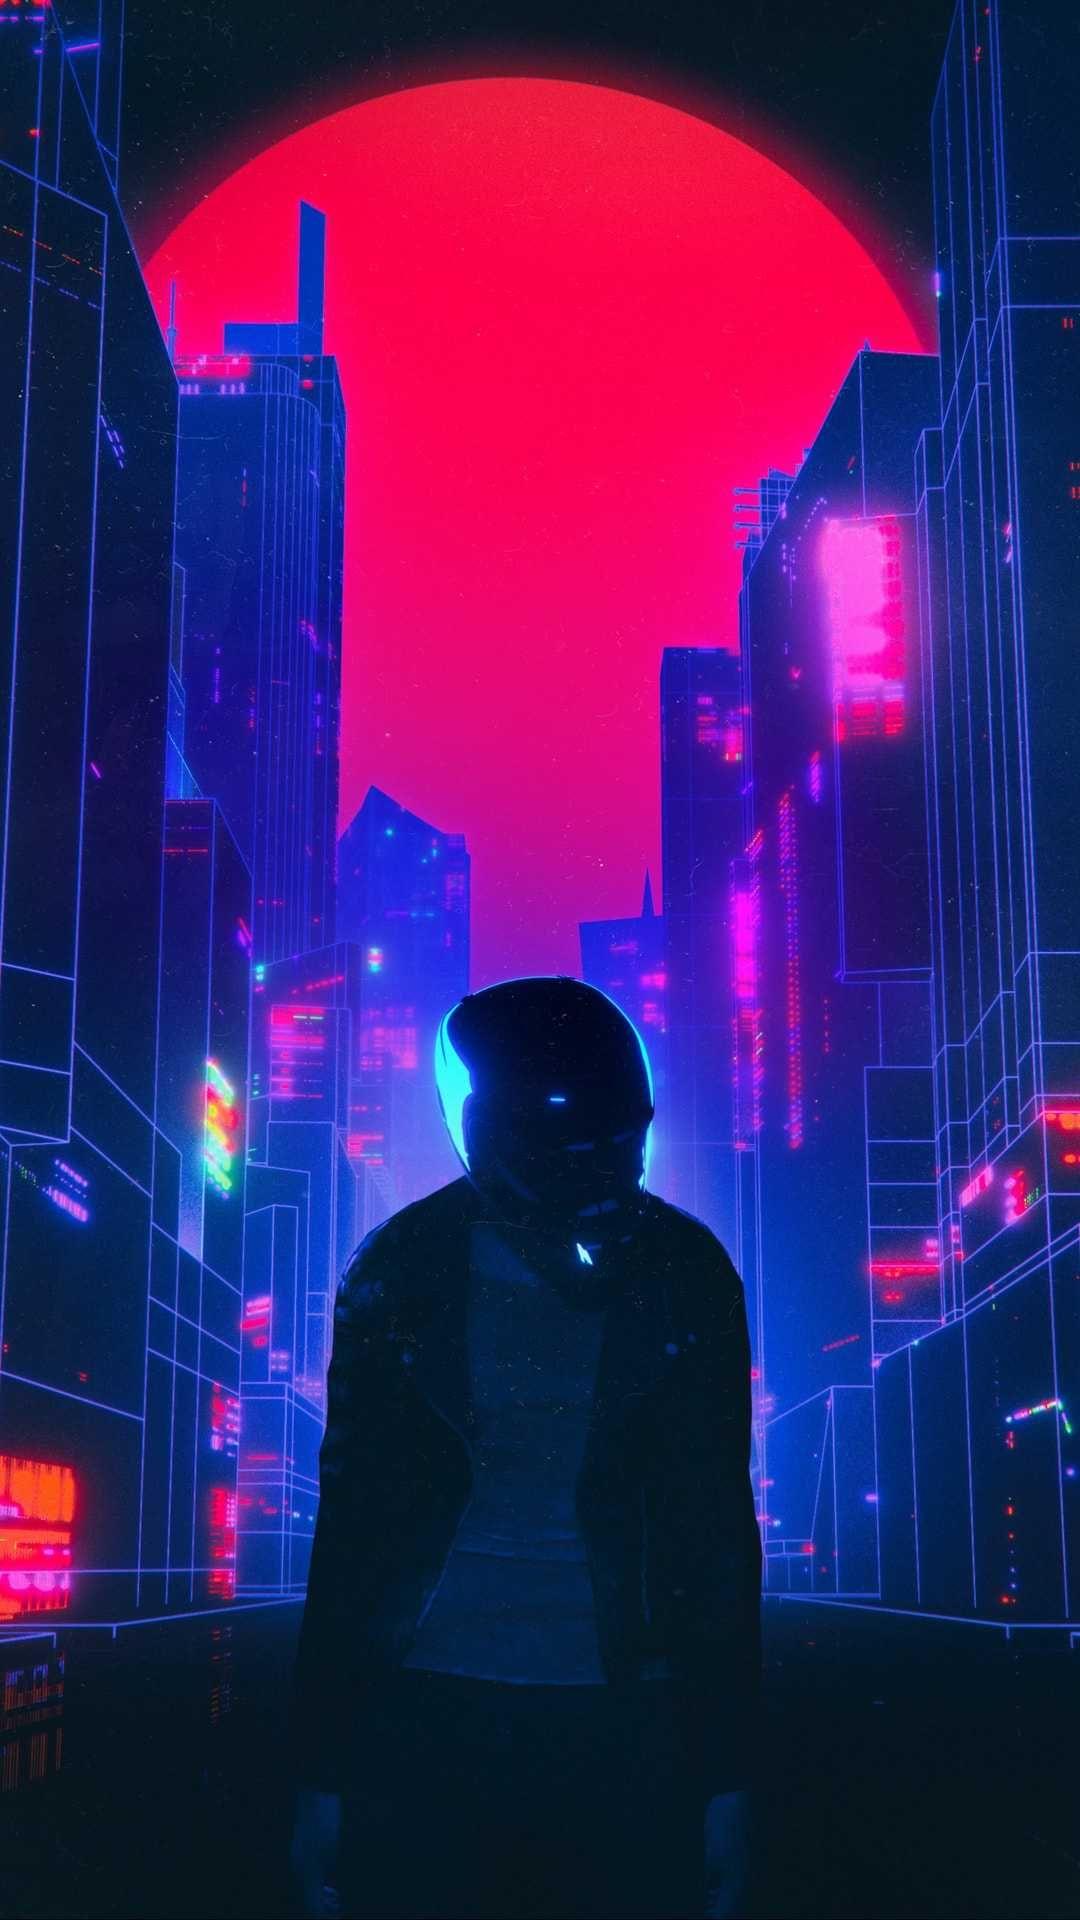 Mobile Cyberpunk Amoled Wallpapers - Wallpaper Cave